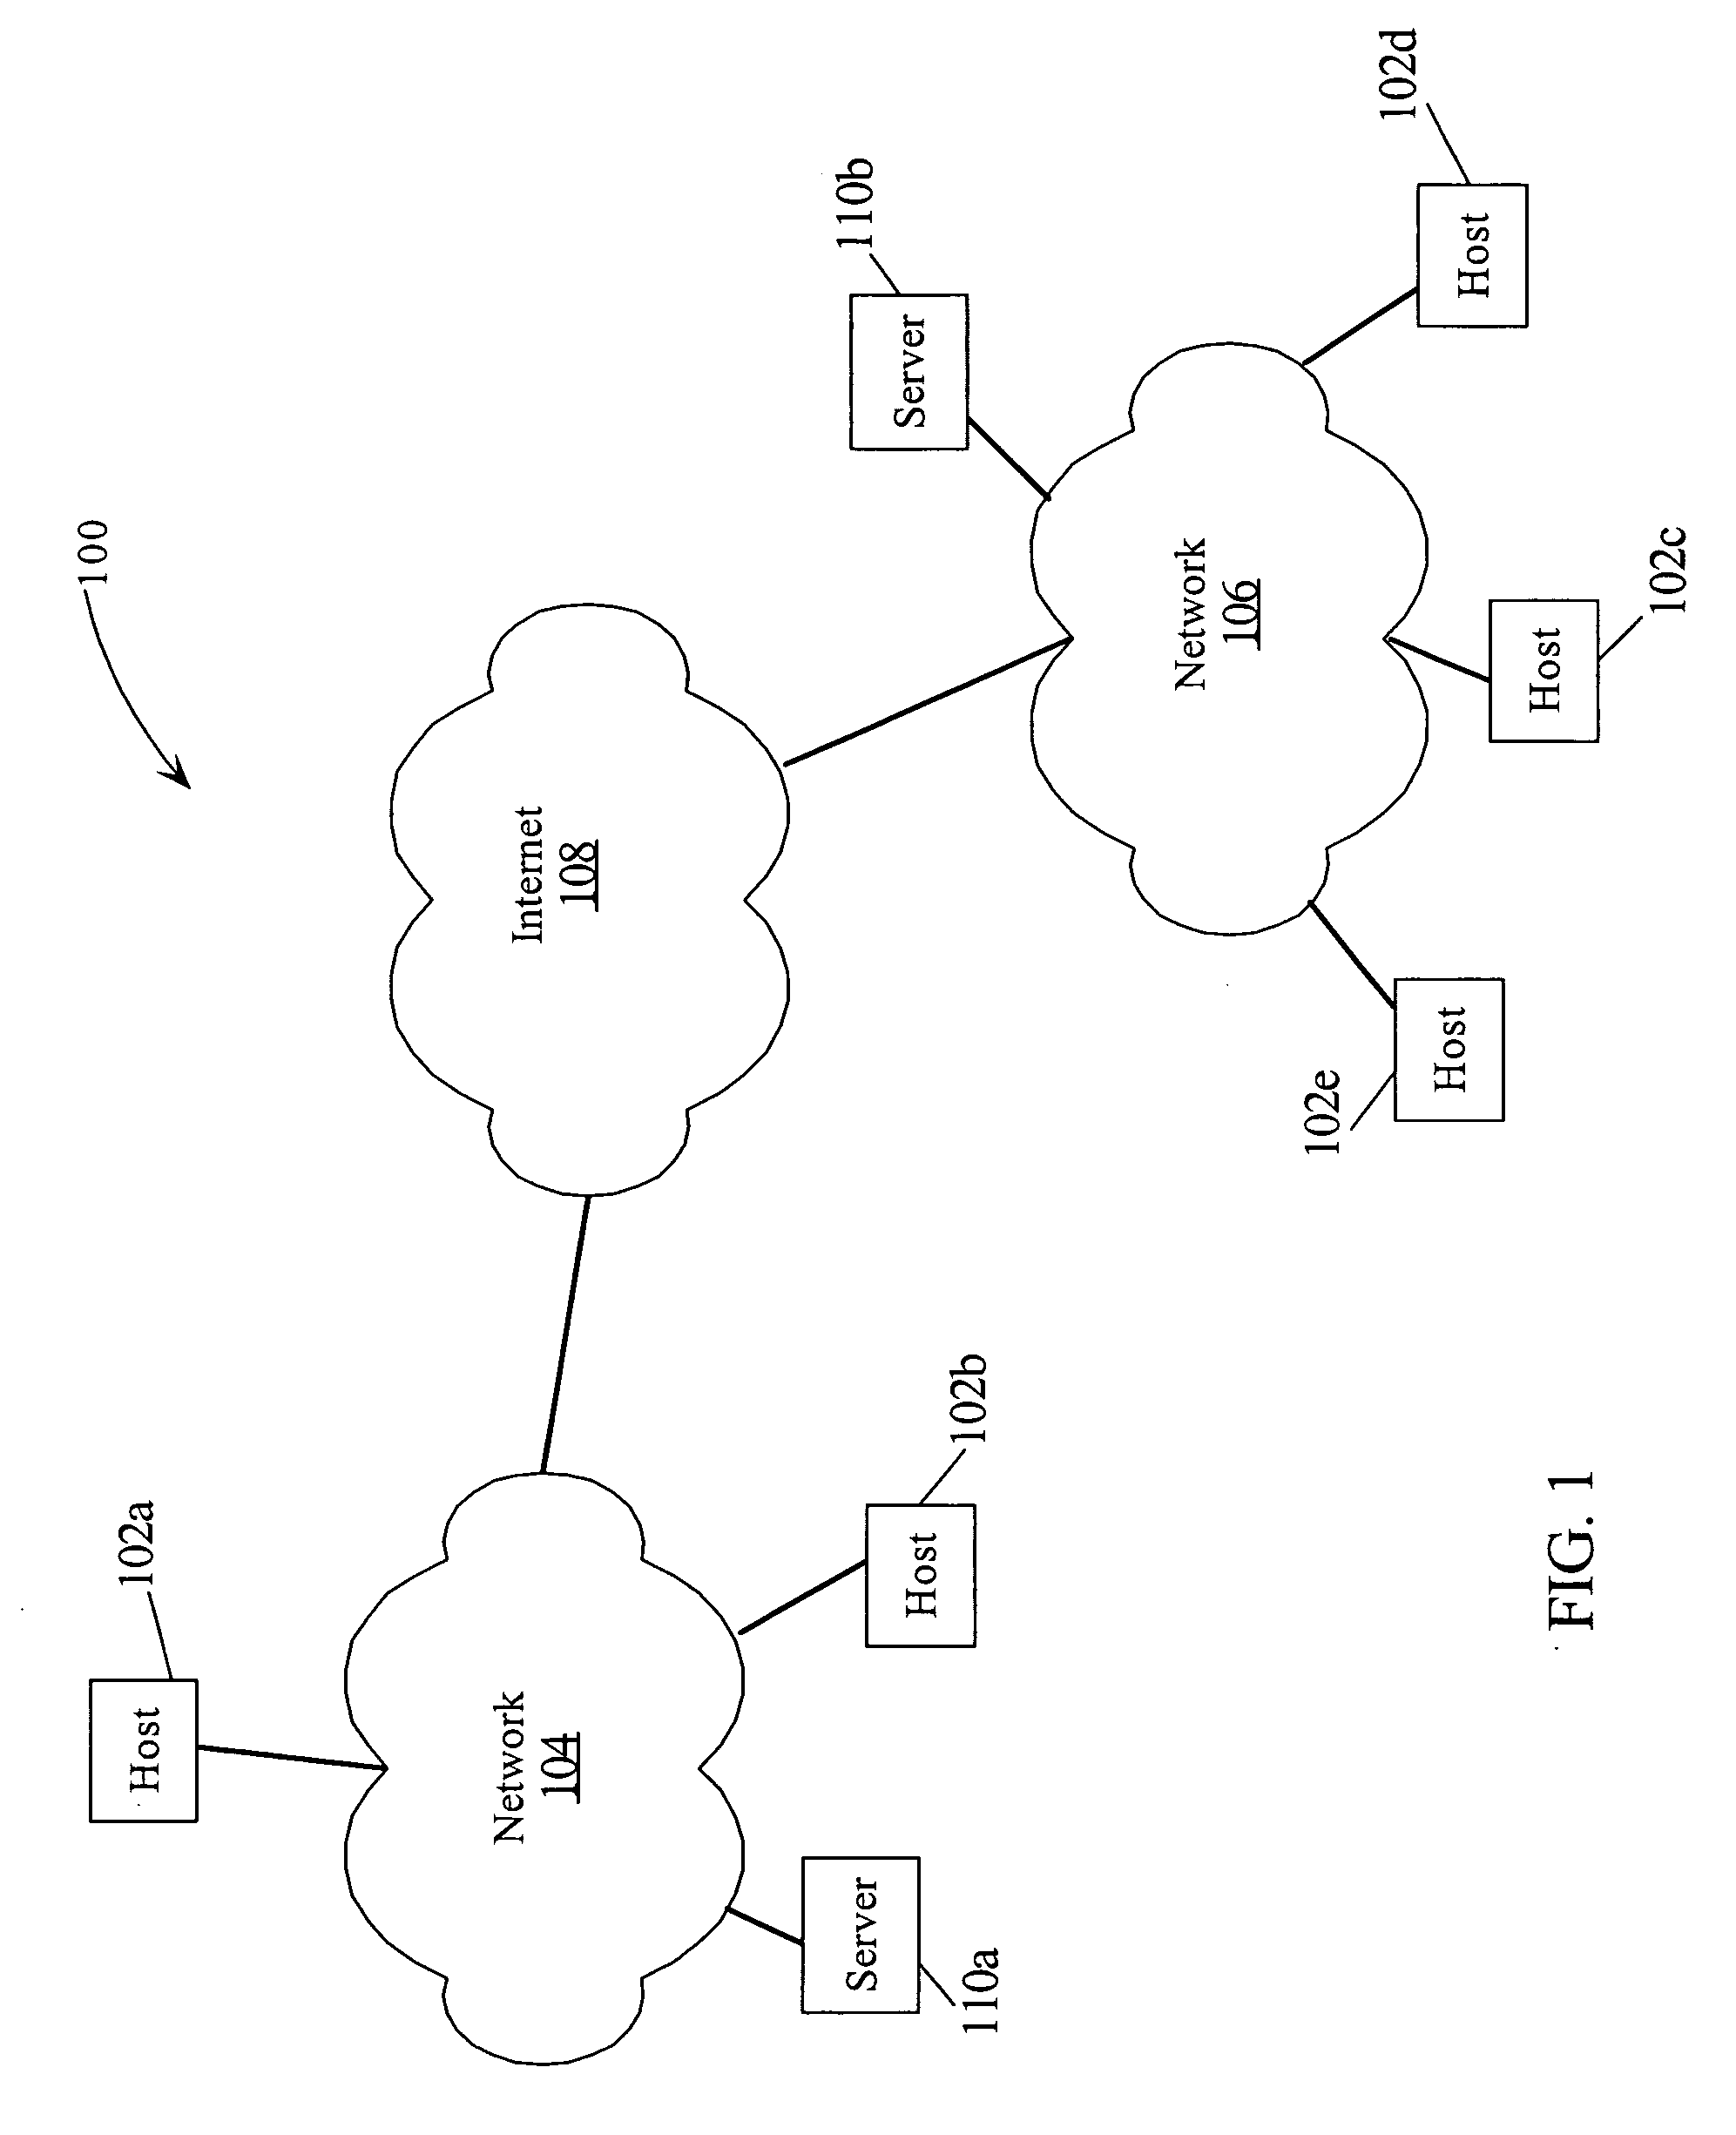 Systems and methods for packaging files having automatic conversion across platforms